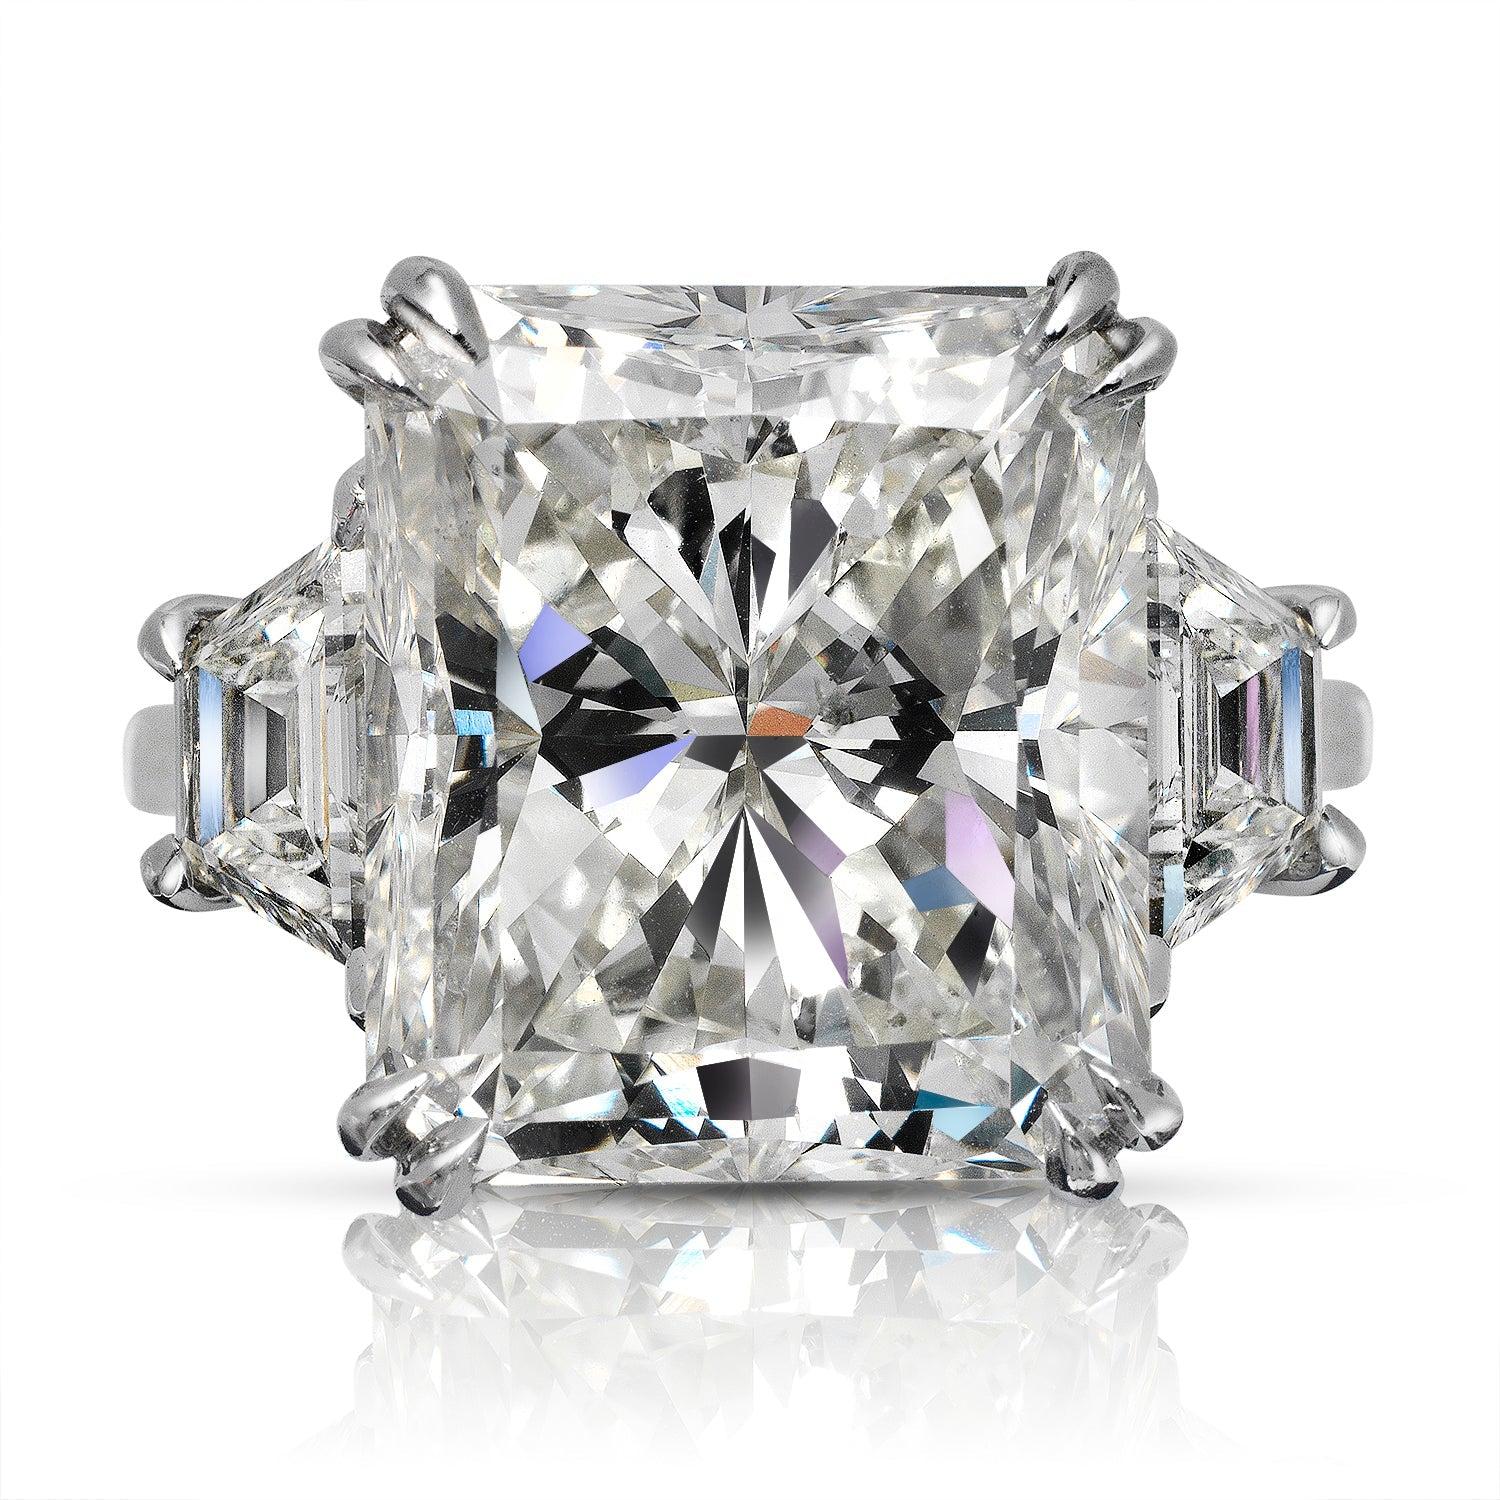 CERES 14 CARAT RADIANT CUT ENGAGEMENT RING PLATINUM  BY MIKE NEKTA 
GIA CERTIFIED
Center Diamond:

Carat Weight: 13 Carats
Color : K
Clarity: SI2
Style: RADIANT CUT-CORNERED RECTANGULAR MODIFIED BRILLIANT
Approximate Measurements: 14.6 x 12.7 x 8.8